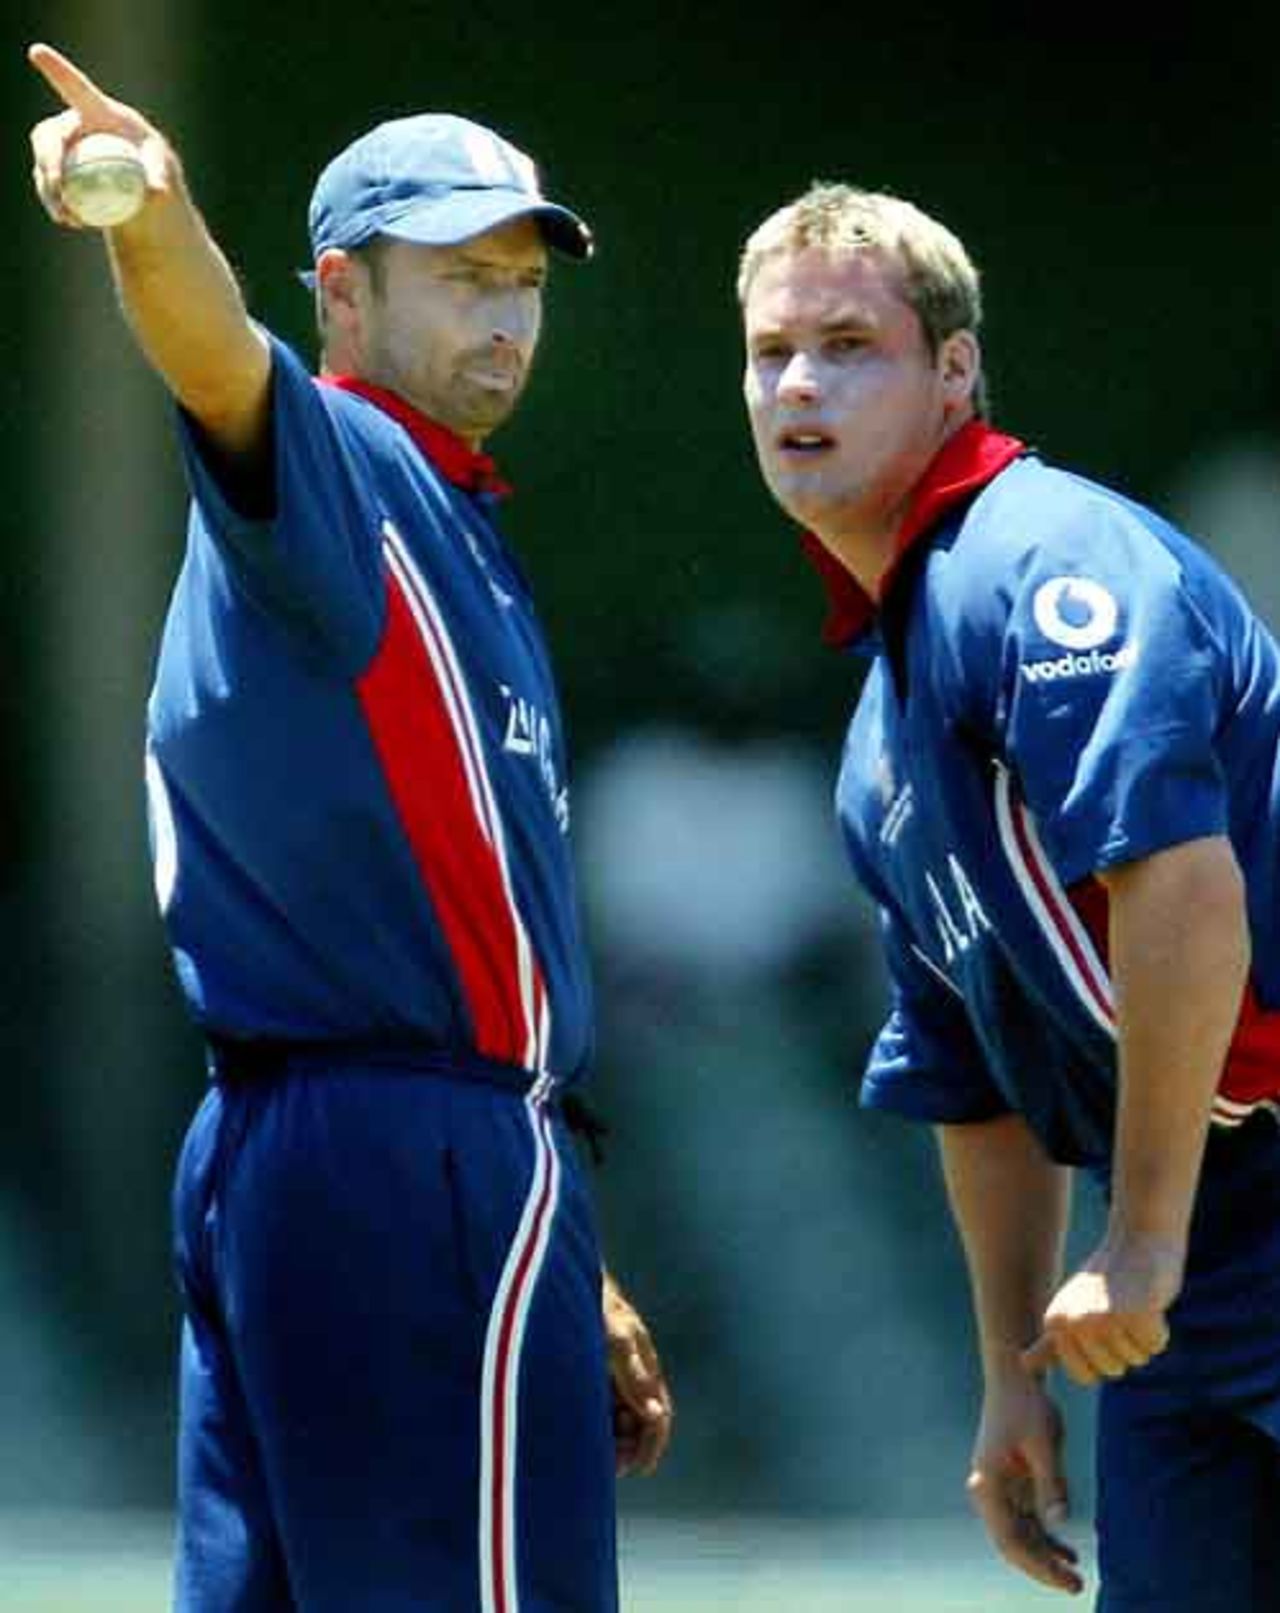 England's skipper Nasser Hussain instructs bowler Ian Blackwell during their World Cup warm up match against Border Bears at Buffalo Park in East London, South Africa, February 6, 2003.